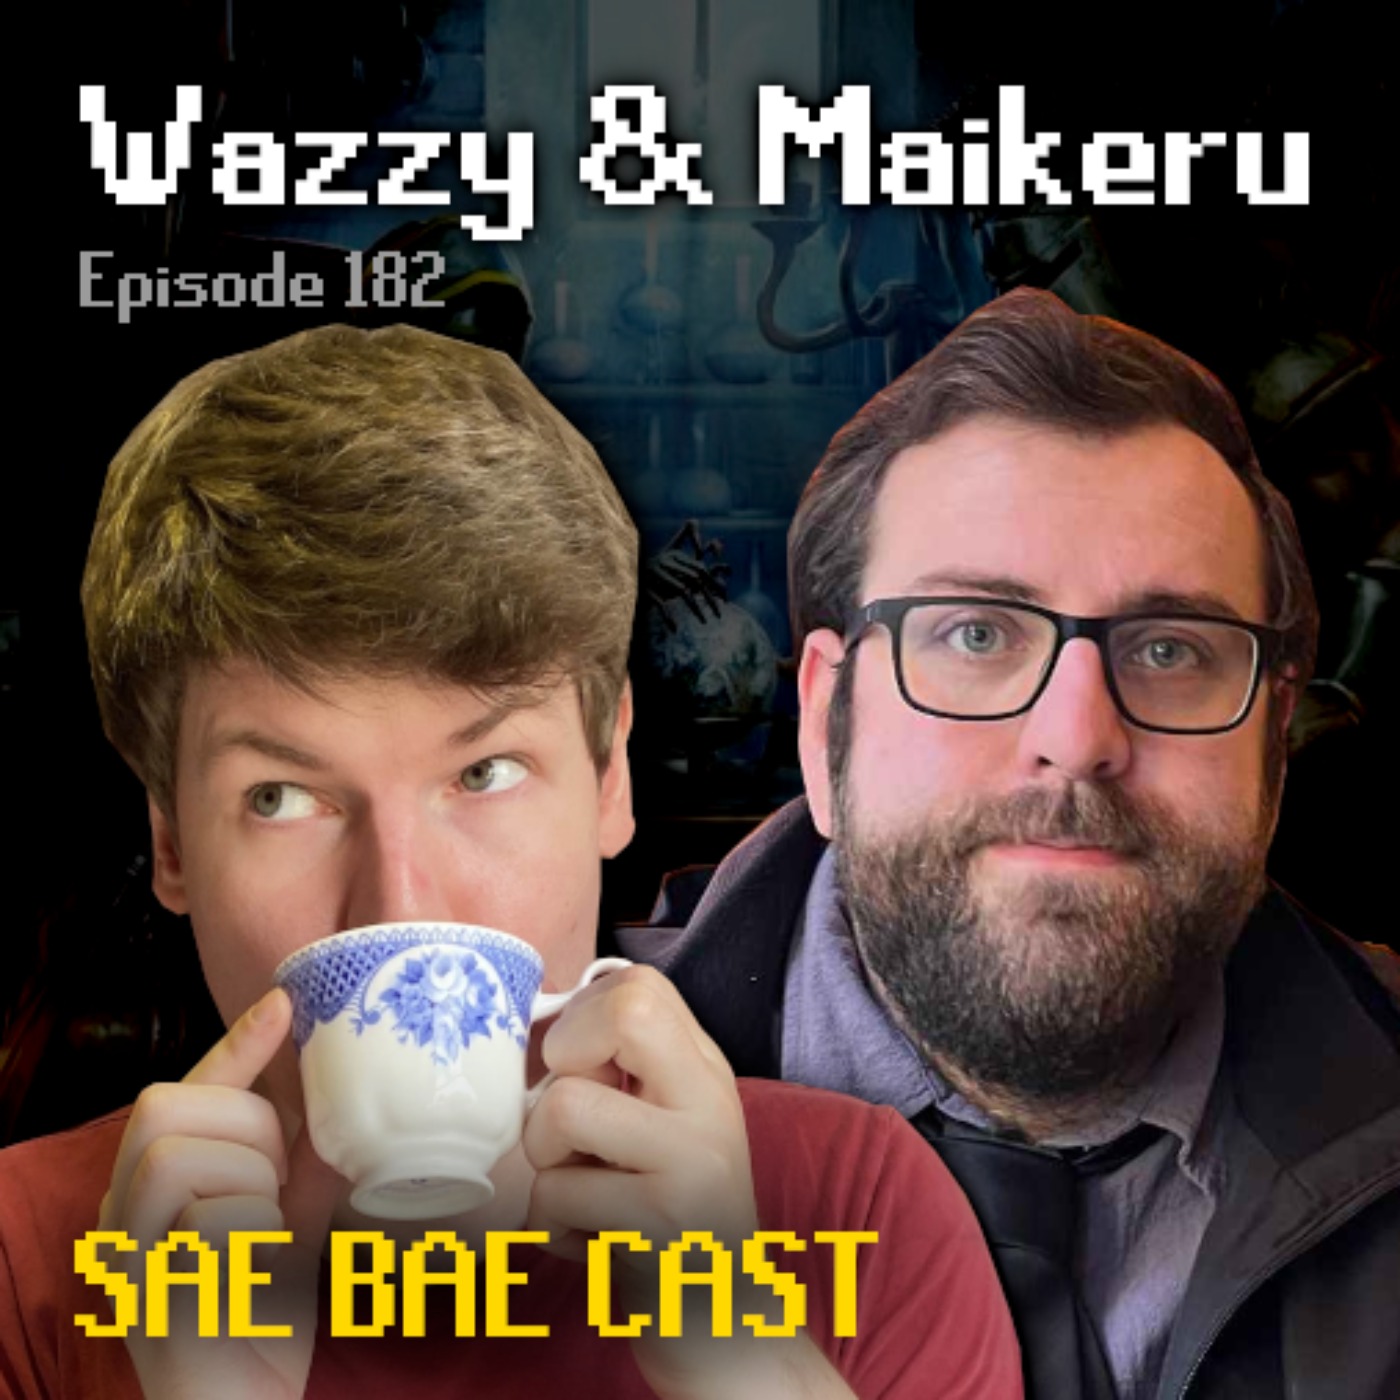 Wazzy & Maikeru - RS3 vs OSRS, Bad Luck Mitigation, Clues, Microtransactions | Sae Bae Cast 182